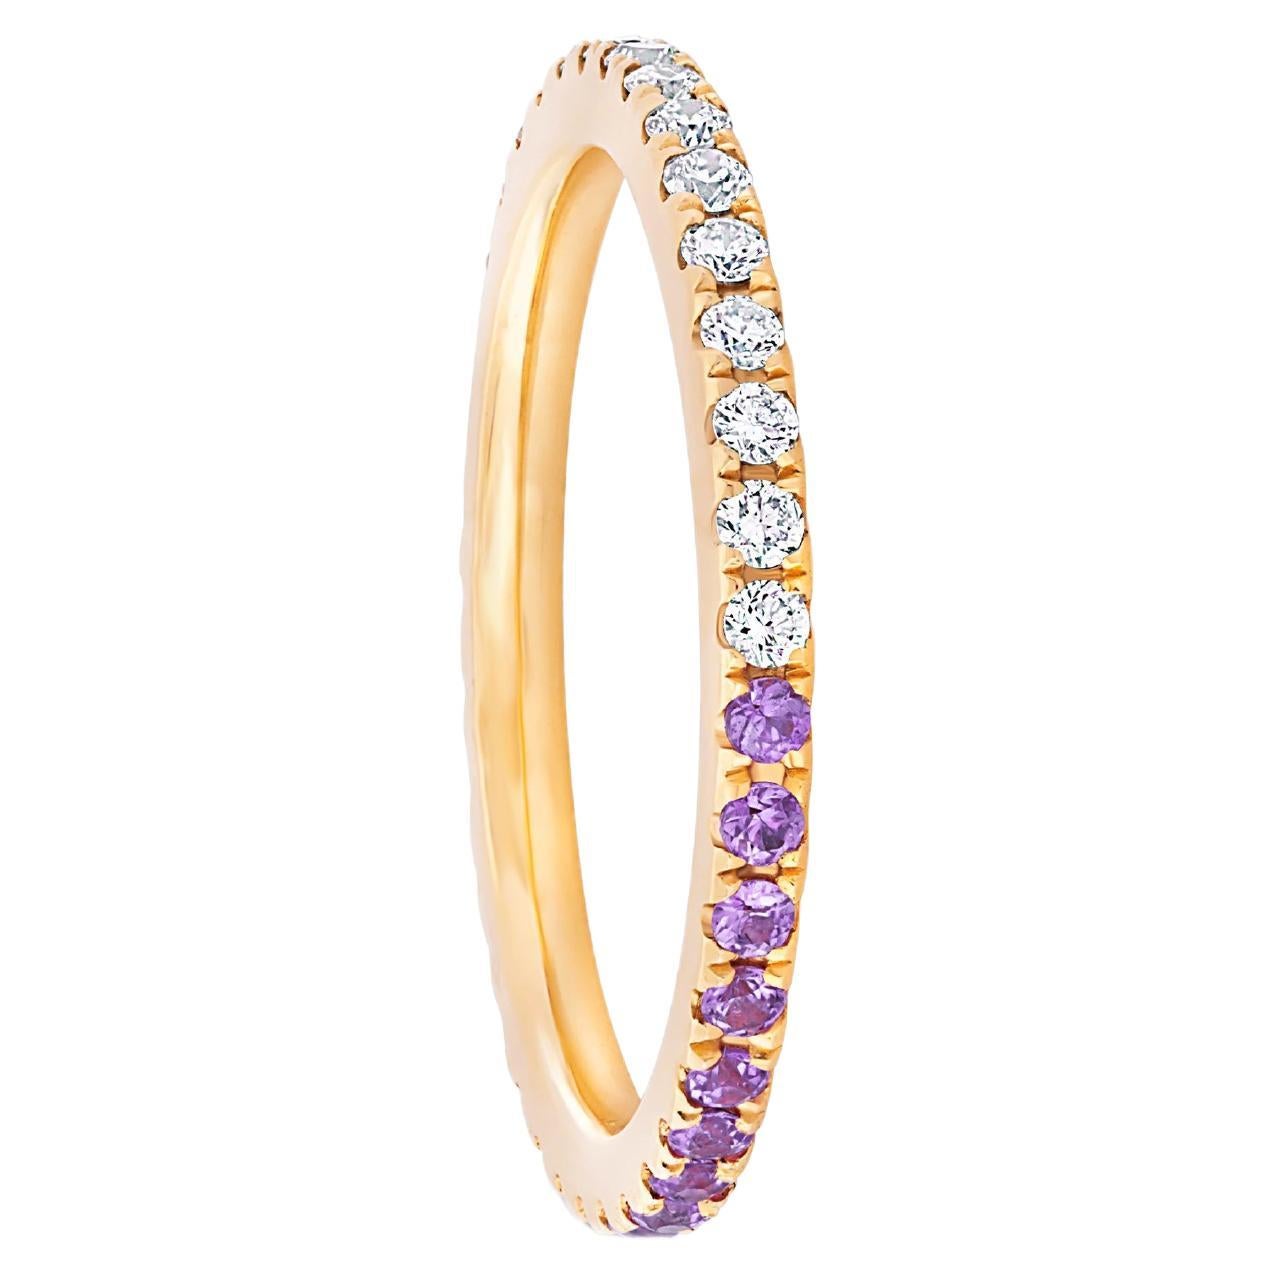 Ombre Blue Amethyst and Moissanite 14k gold Eternity Band. For Sale